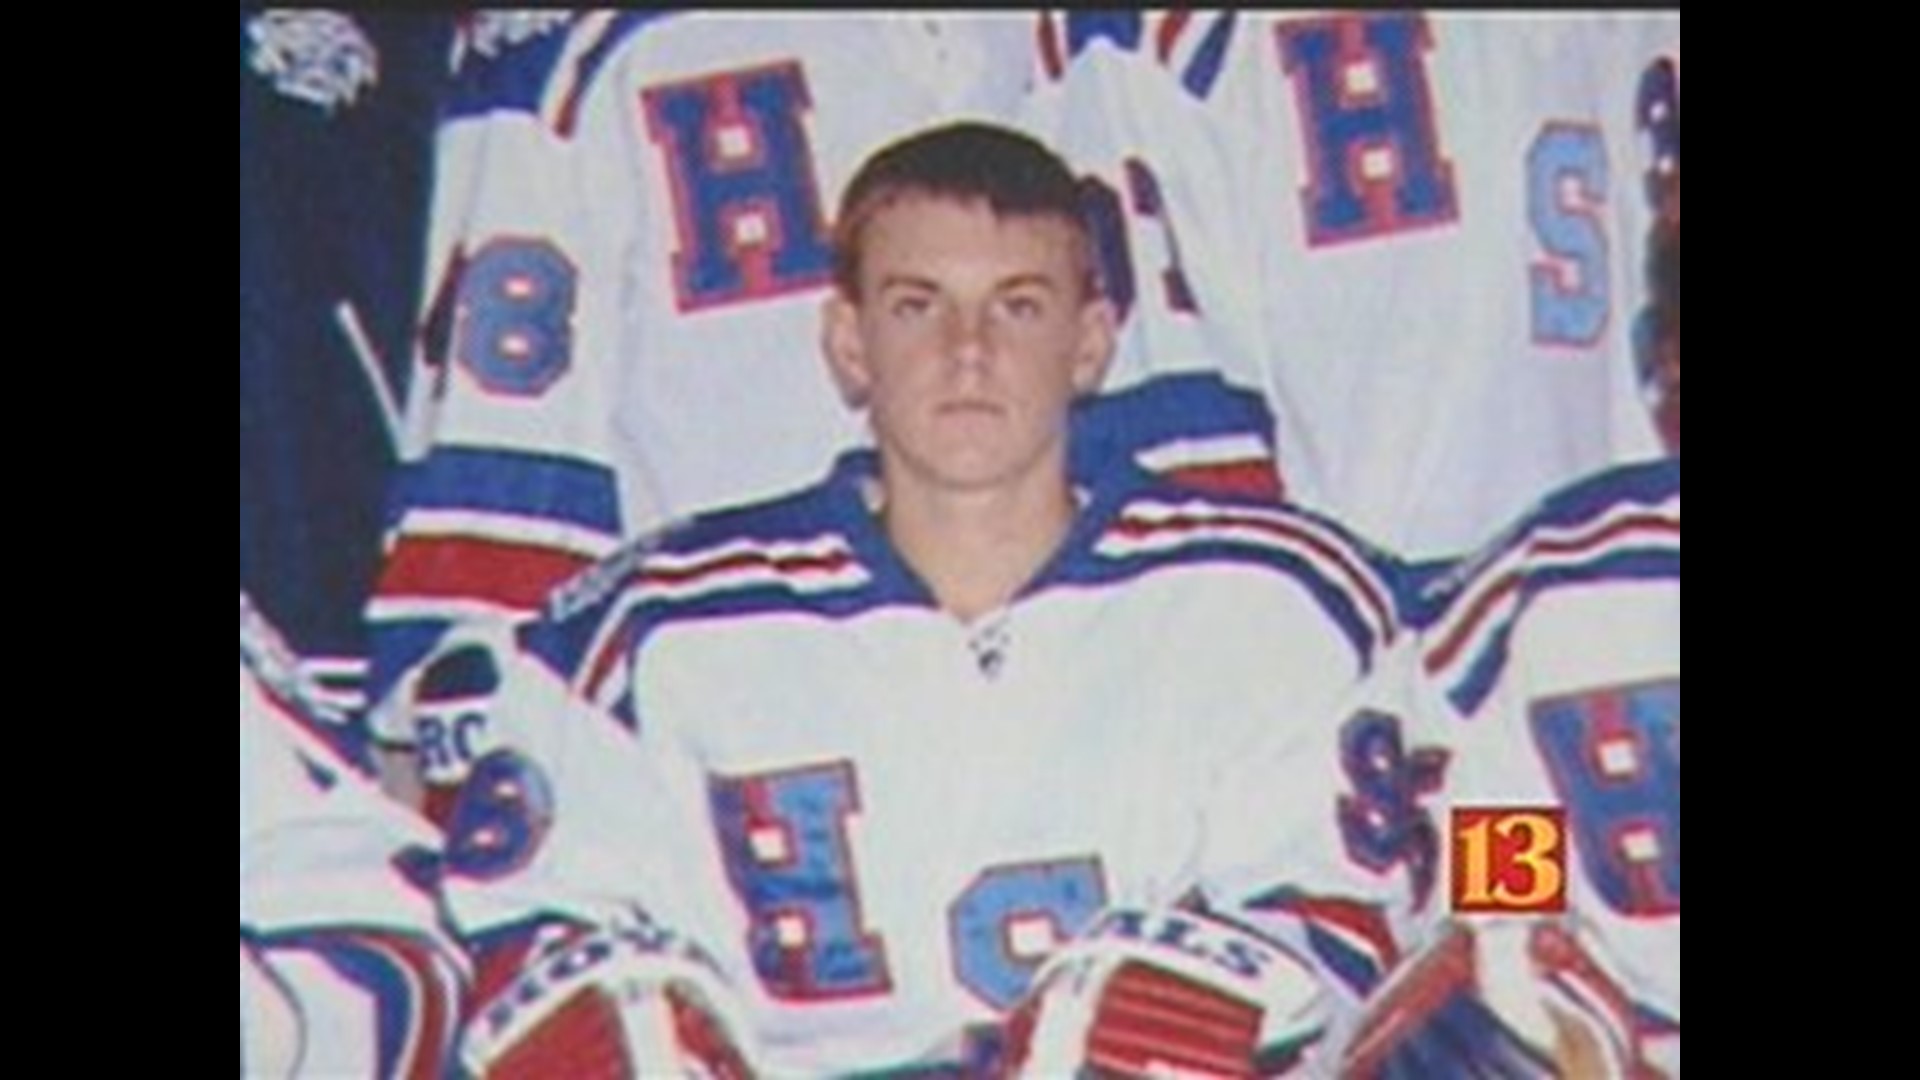 Hockey team honors player who died